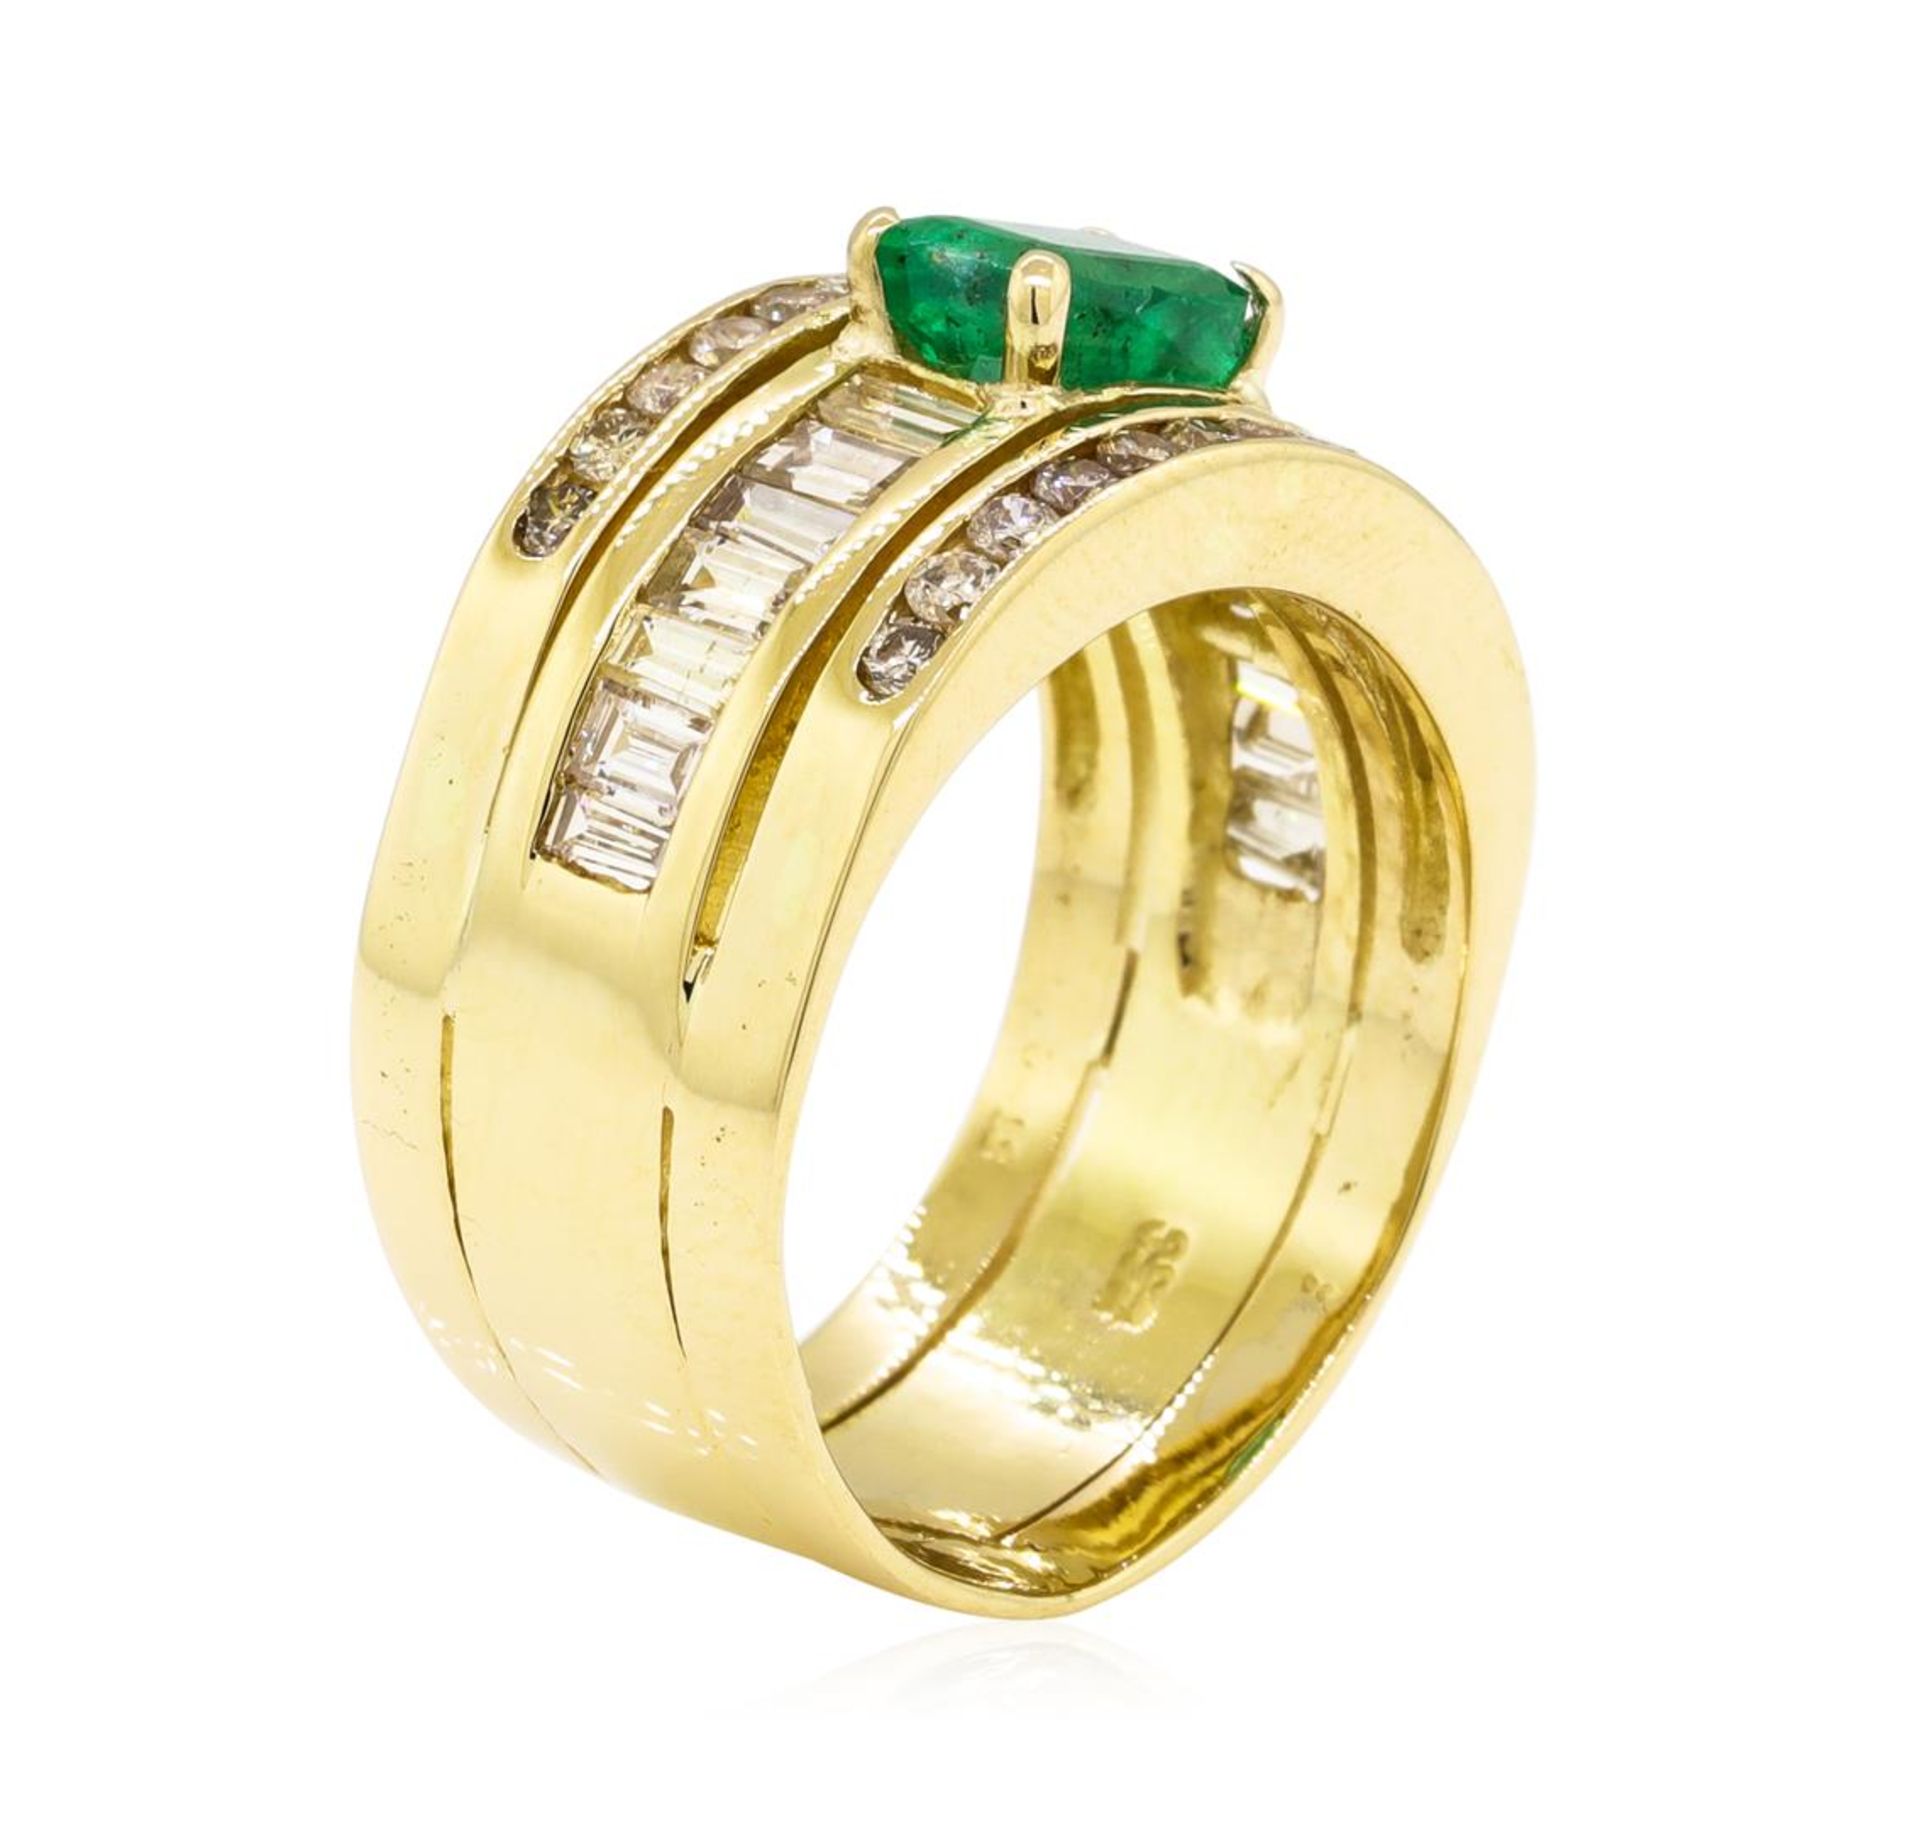 0.90 ctw ct Emerald and Diamond Ring - 18KT Yellow Gold - Image 4 of 5